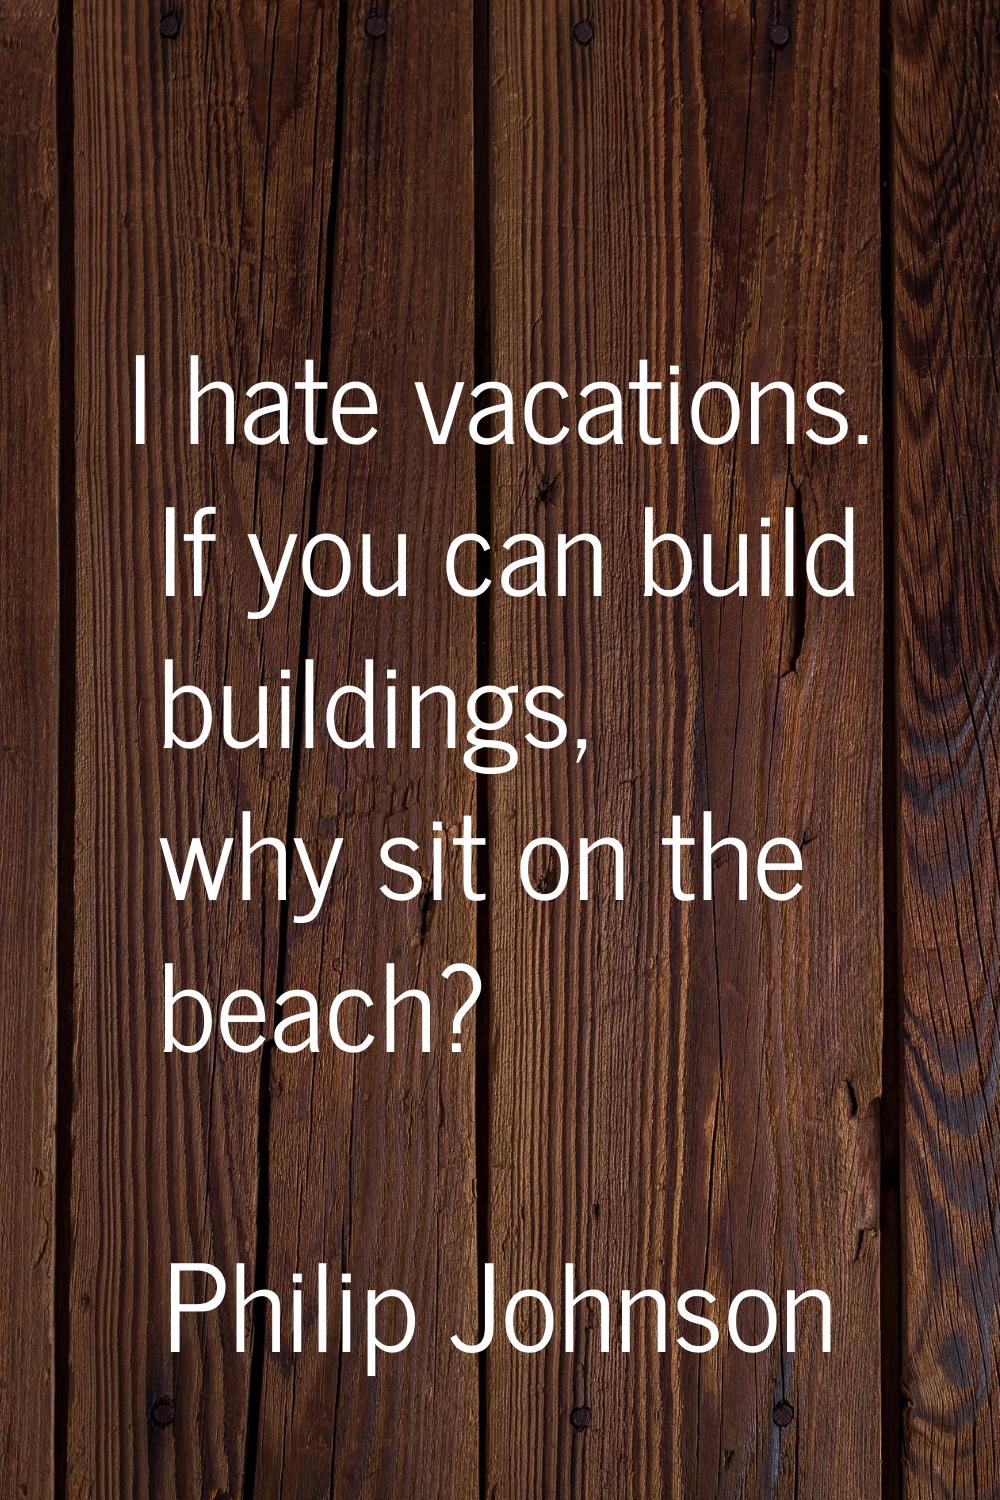 I hate vacations. If you can build buildings, why sit on the beach?